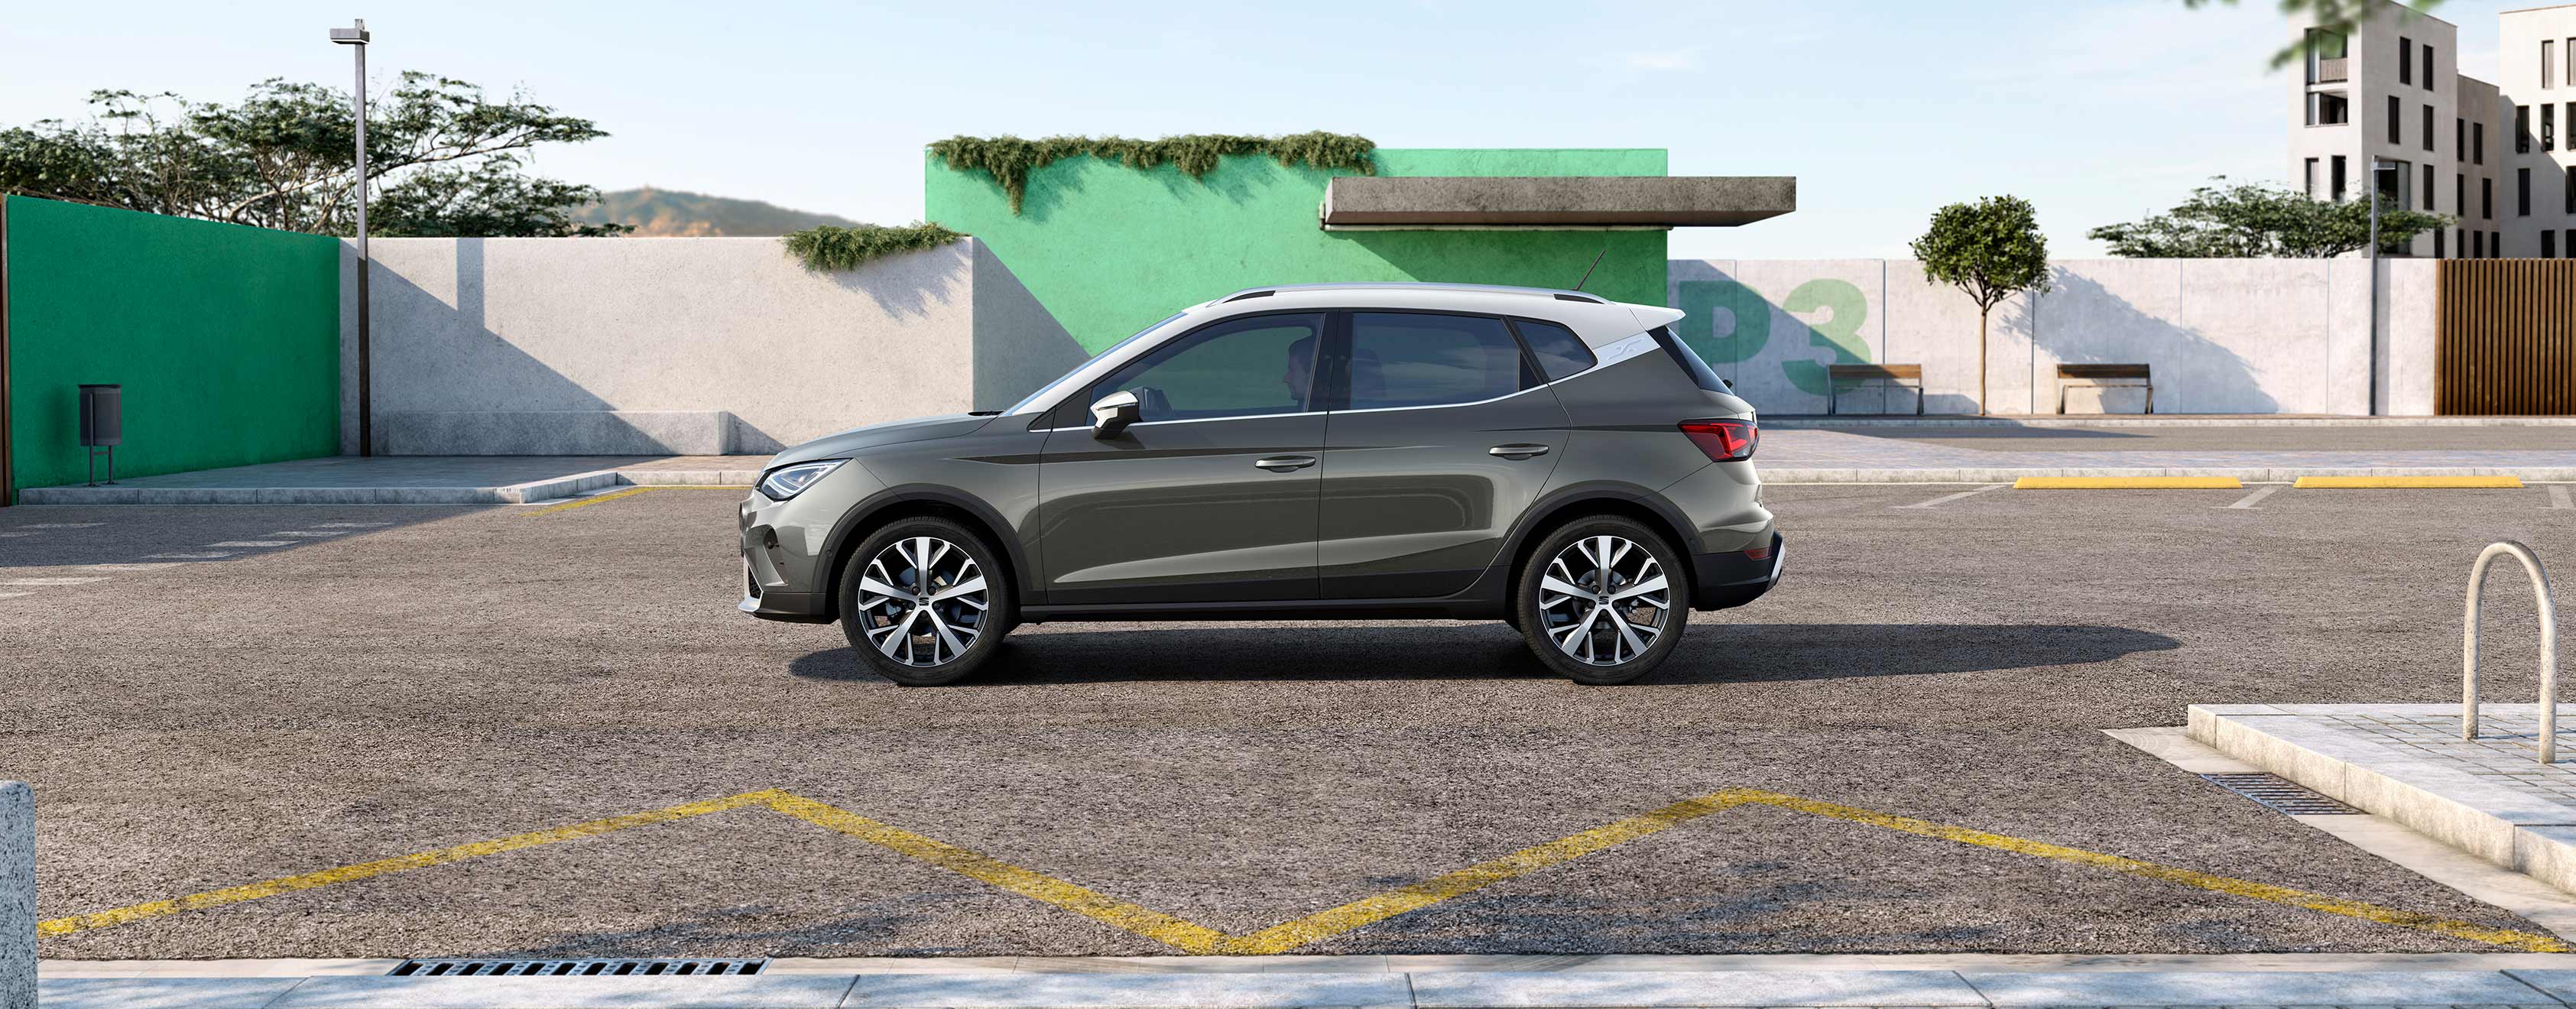 Rear view of the SEAT Arona dark camouflage colour with candy white roof